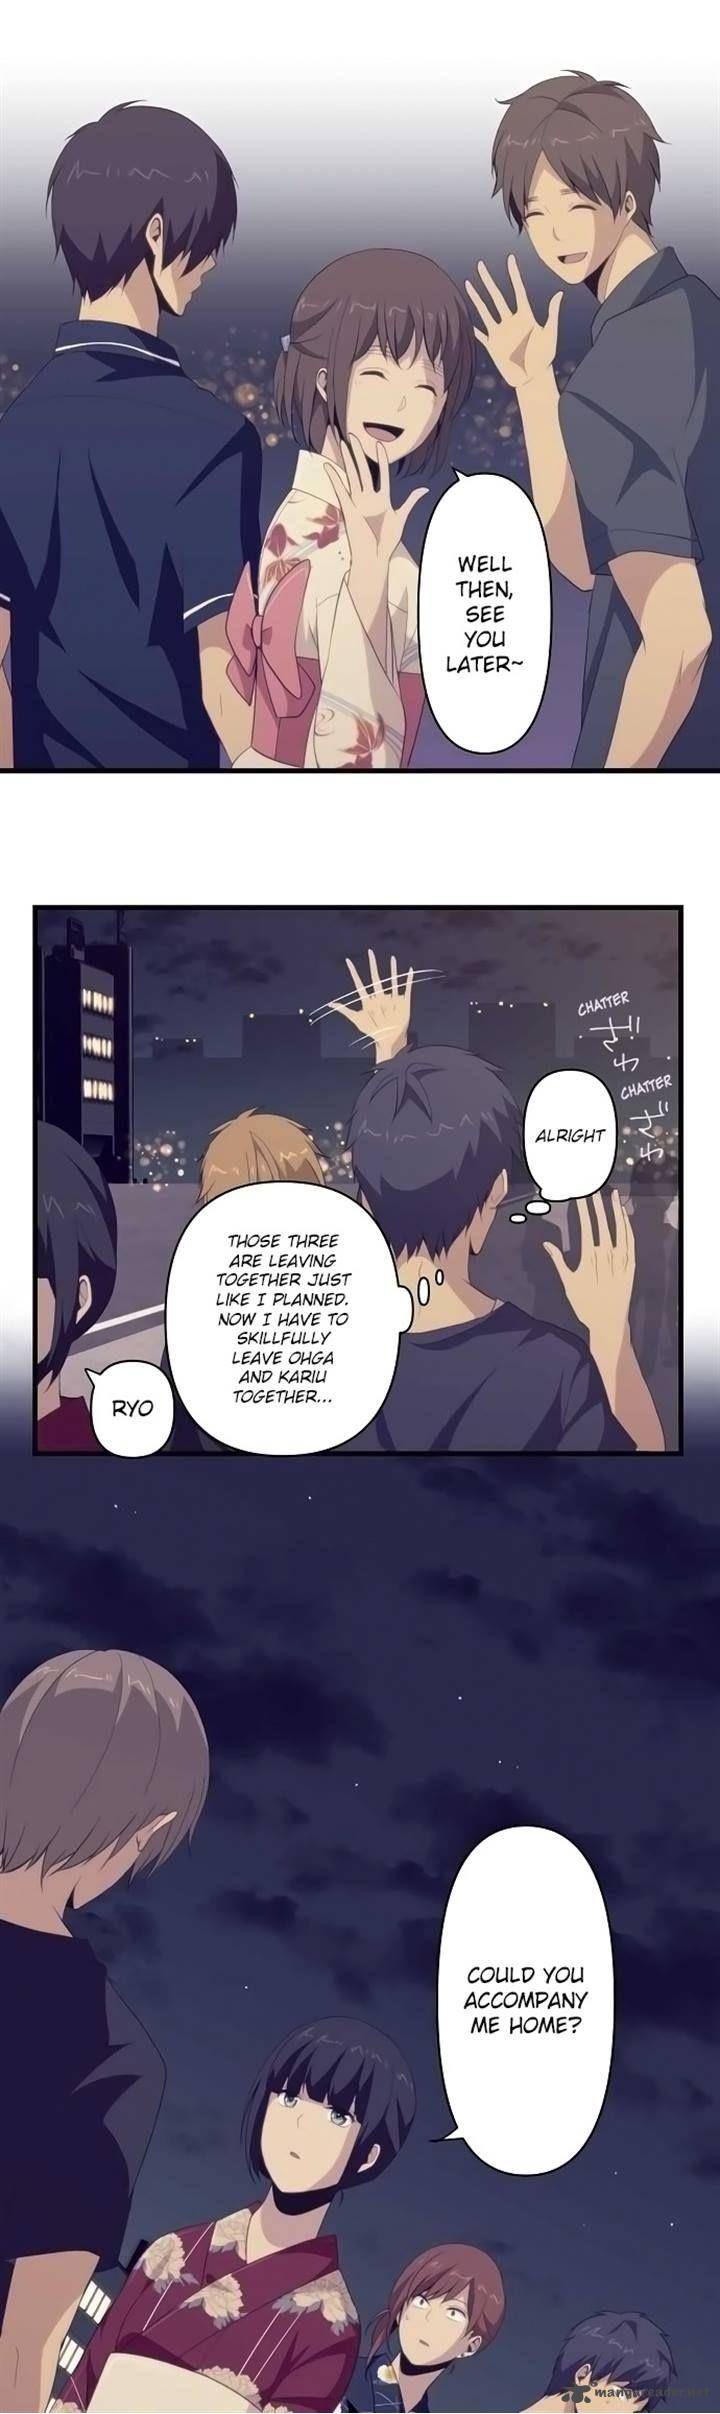 Relife 104 17